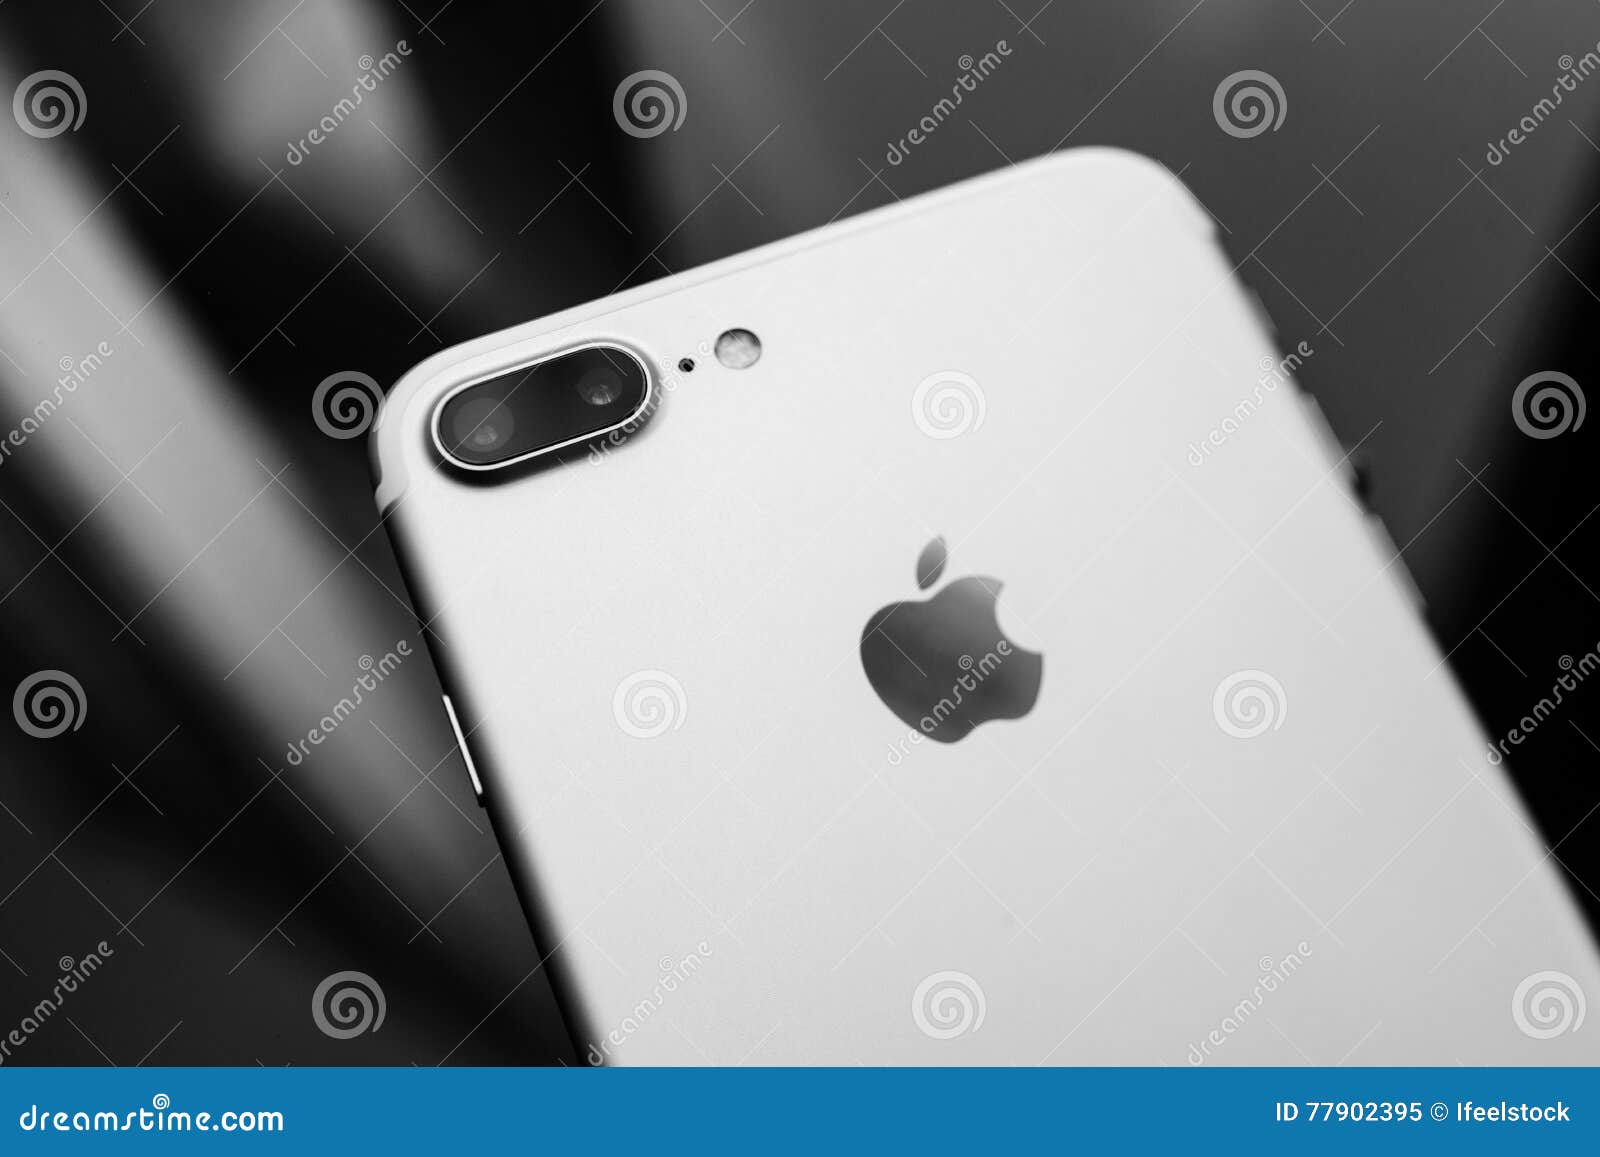 IPhone 7 Plus Black and White Editorial Image - Image of mobile, apple ...